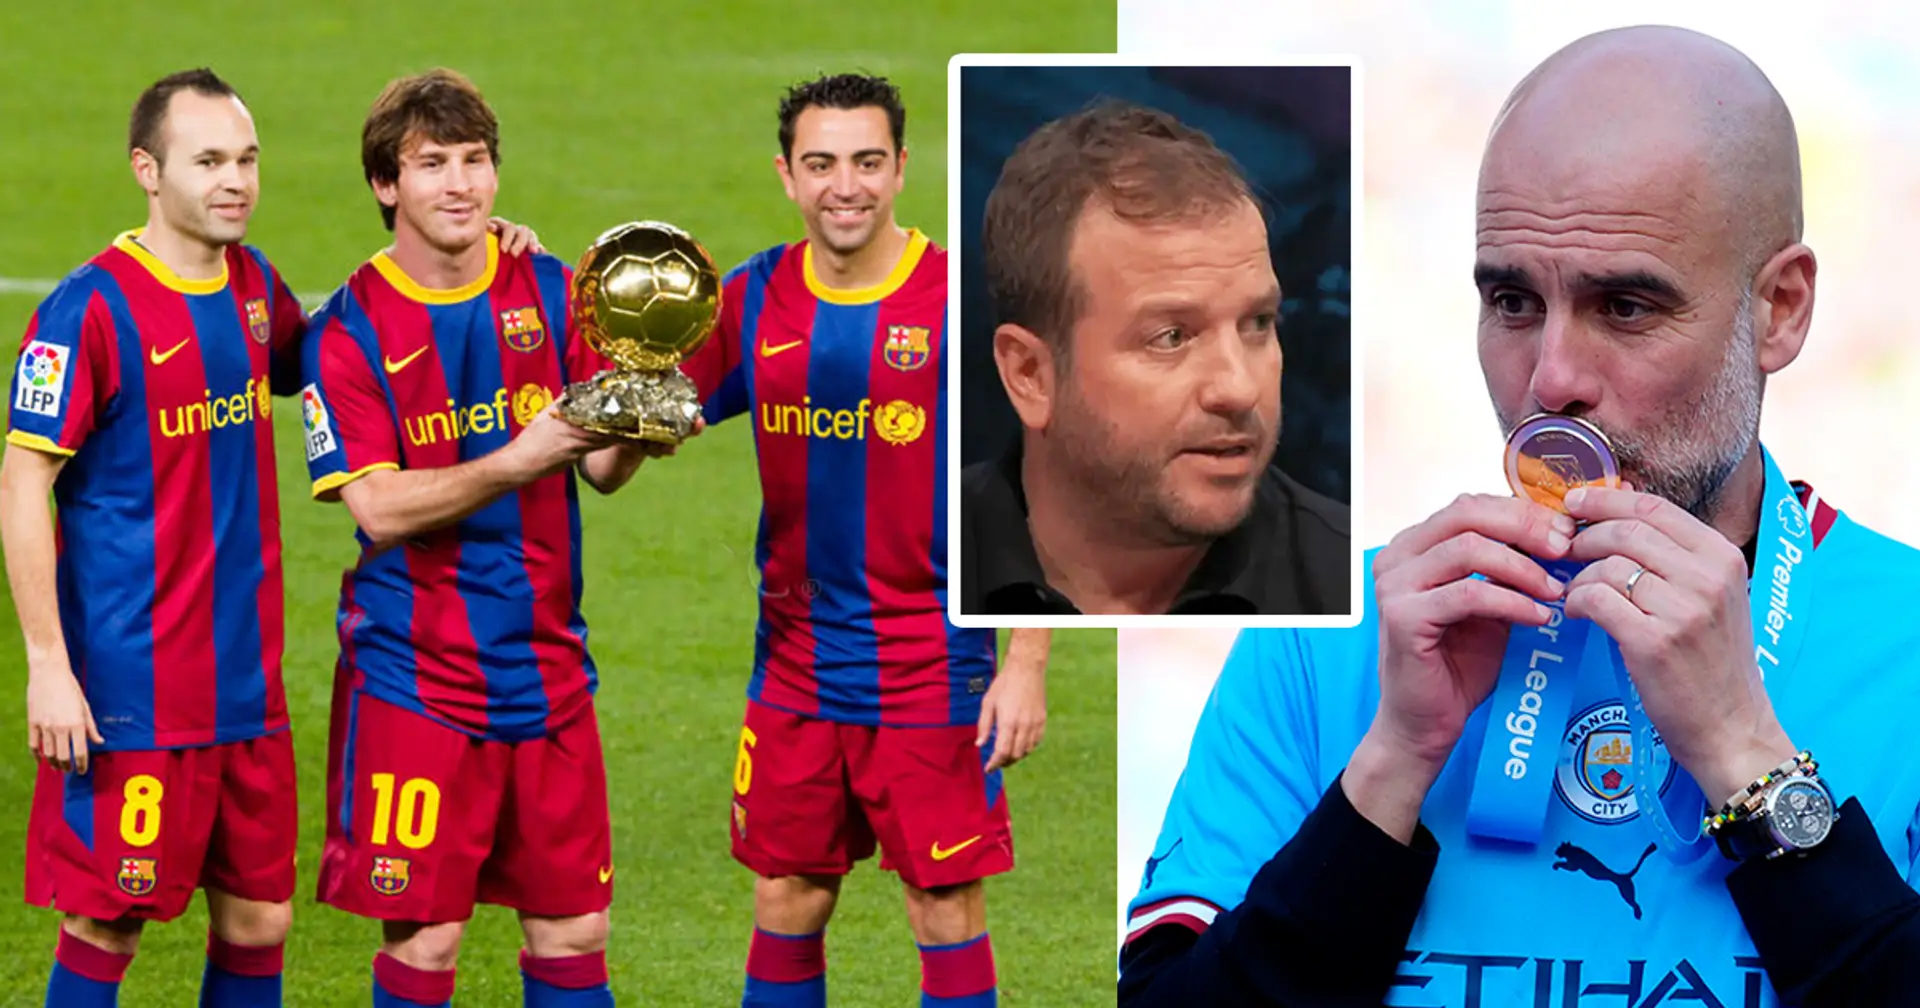 Ex-Madridista Van der Vaart gives clear response when asked to choose between Guardiola's Barcelona and Manchester City